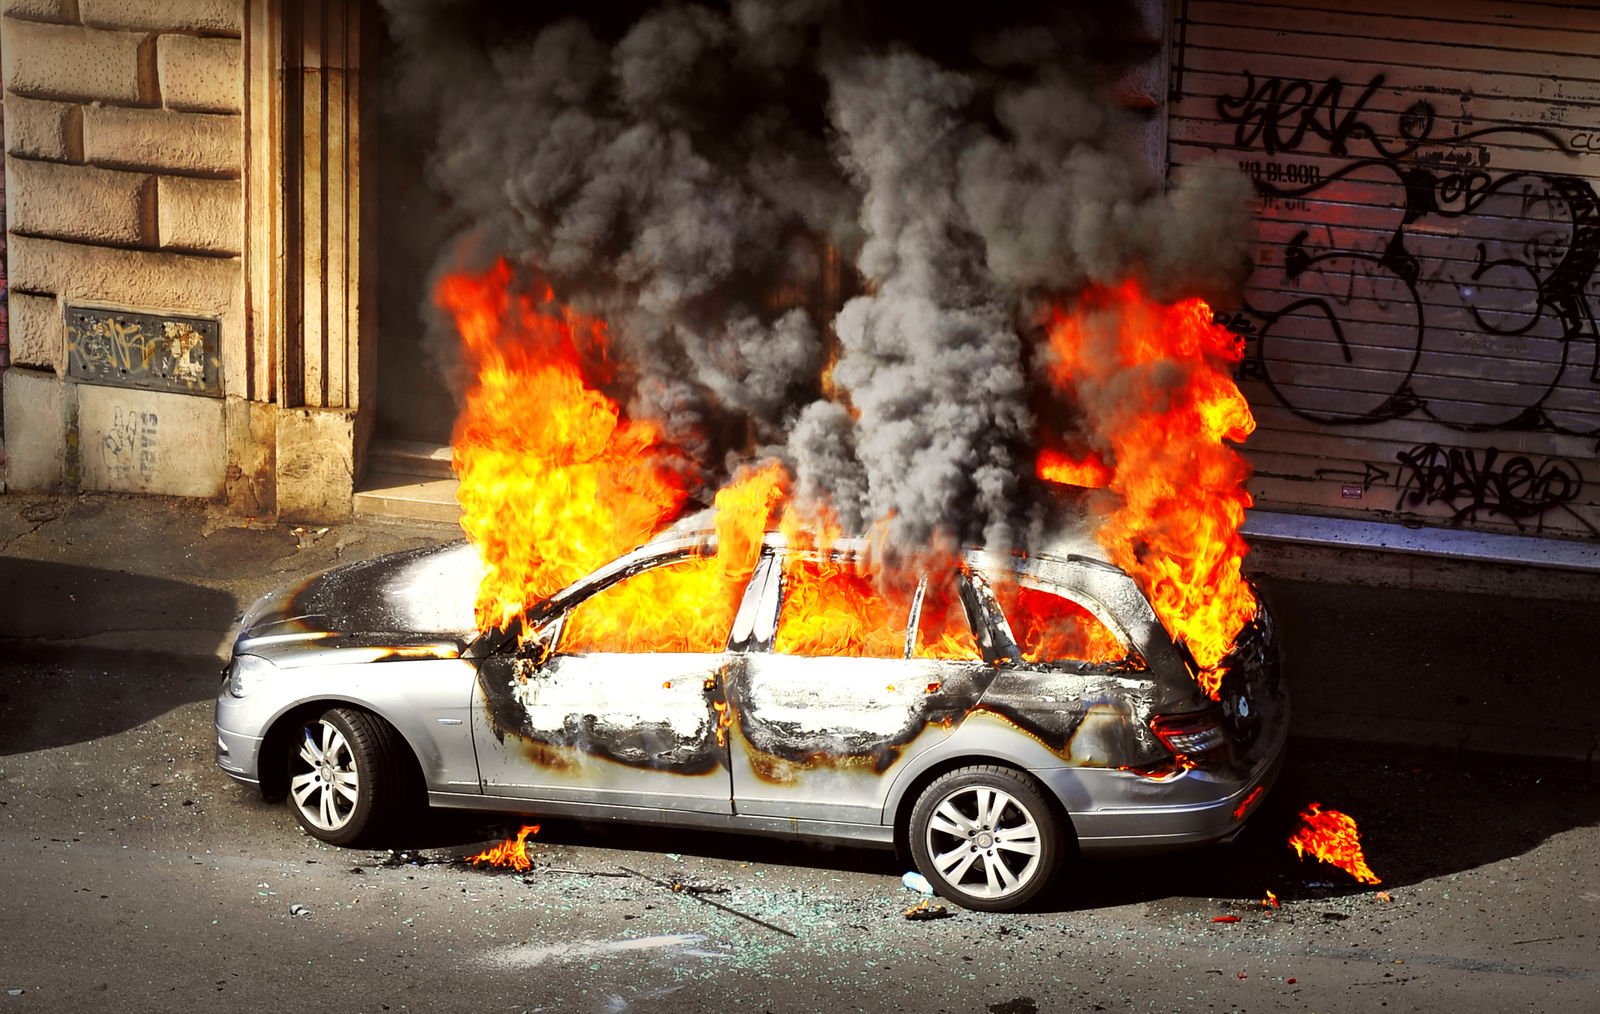 Does auto insurance cover arson?